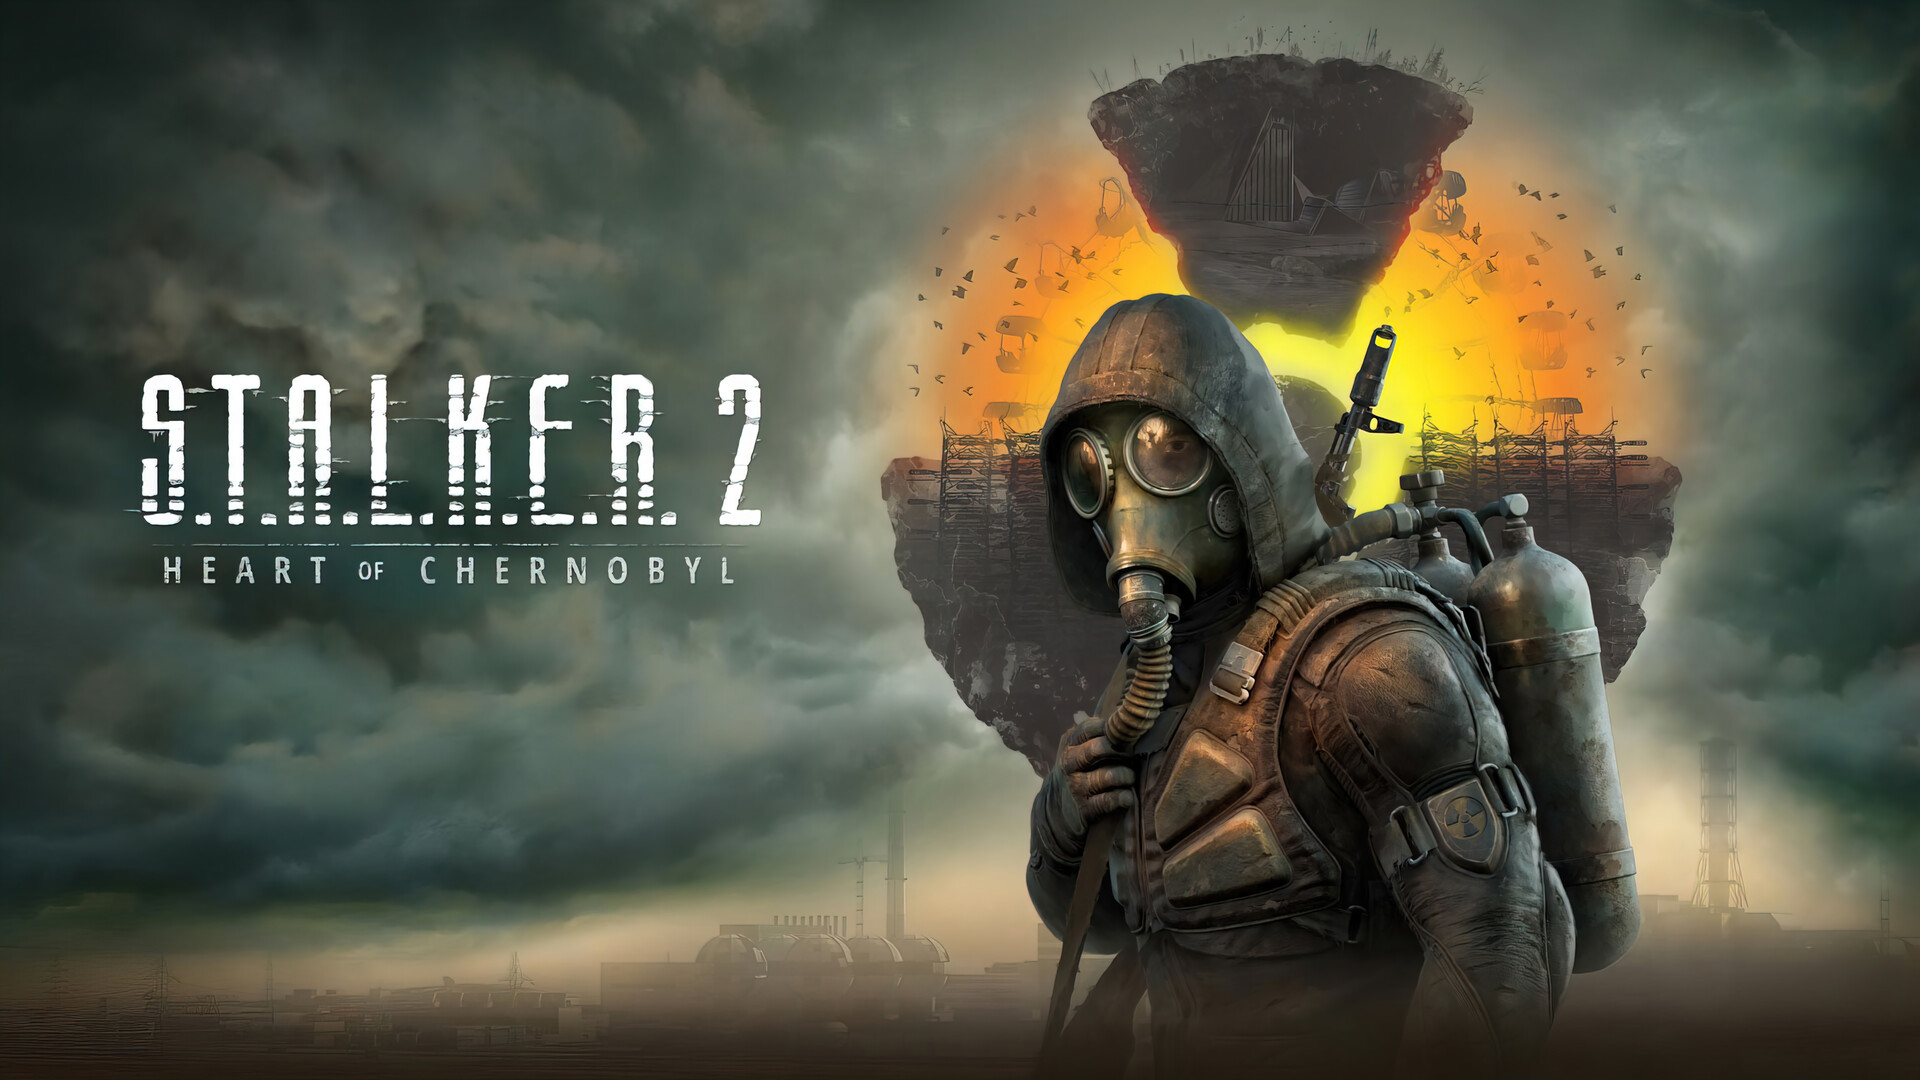 stalker 2: heart of chornobyl: story, release date and system requirements...